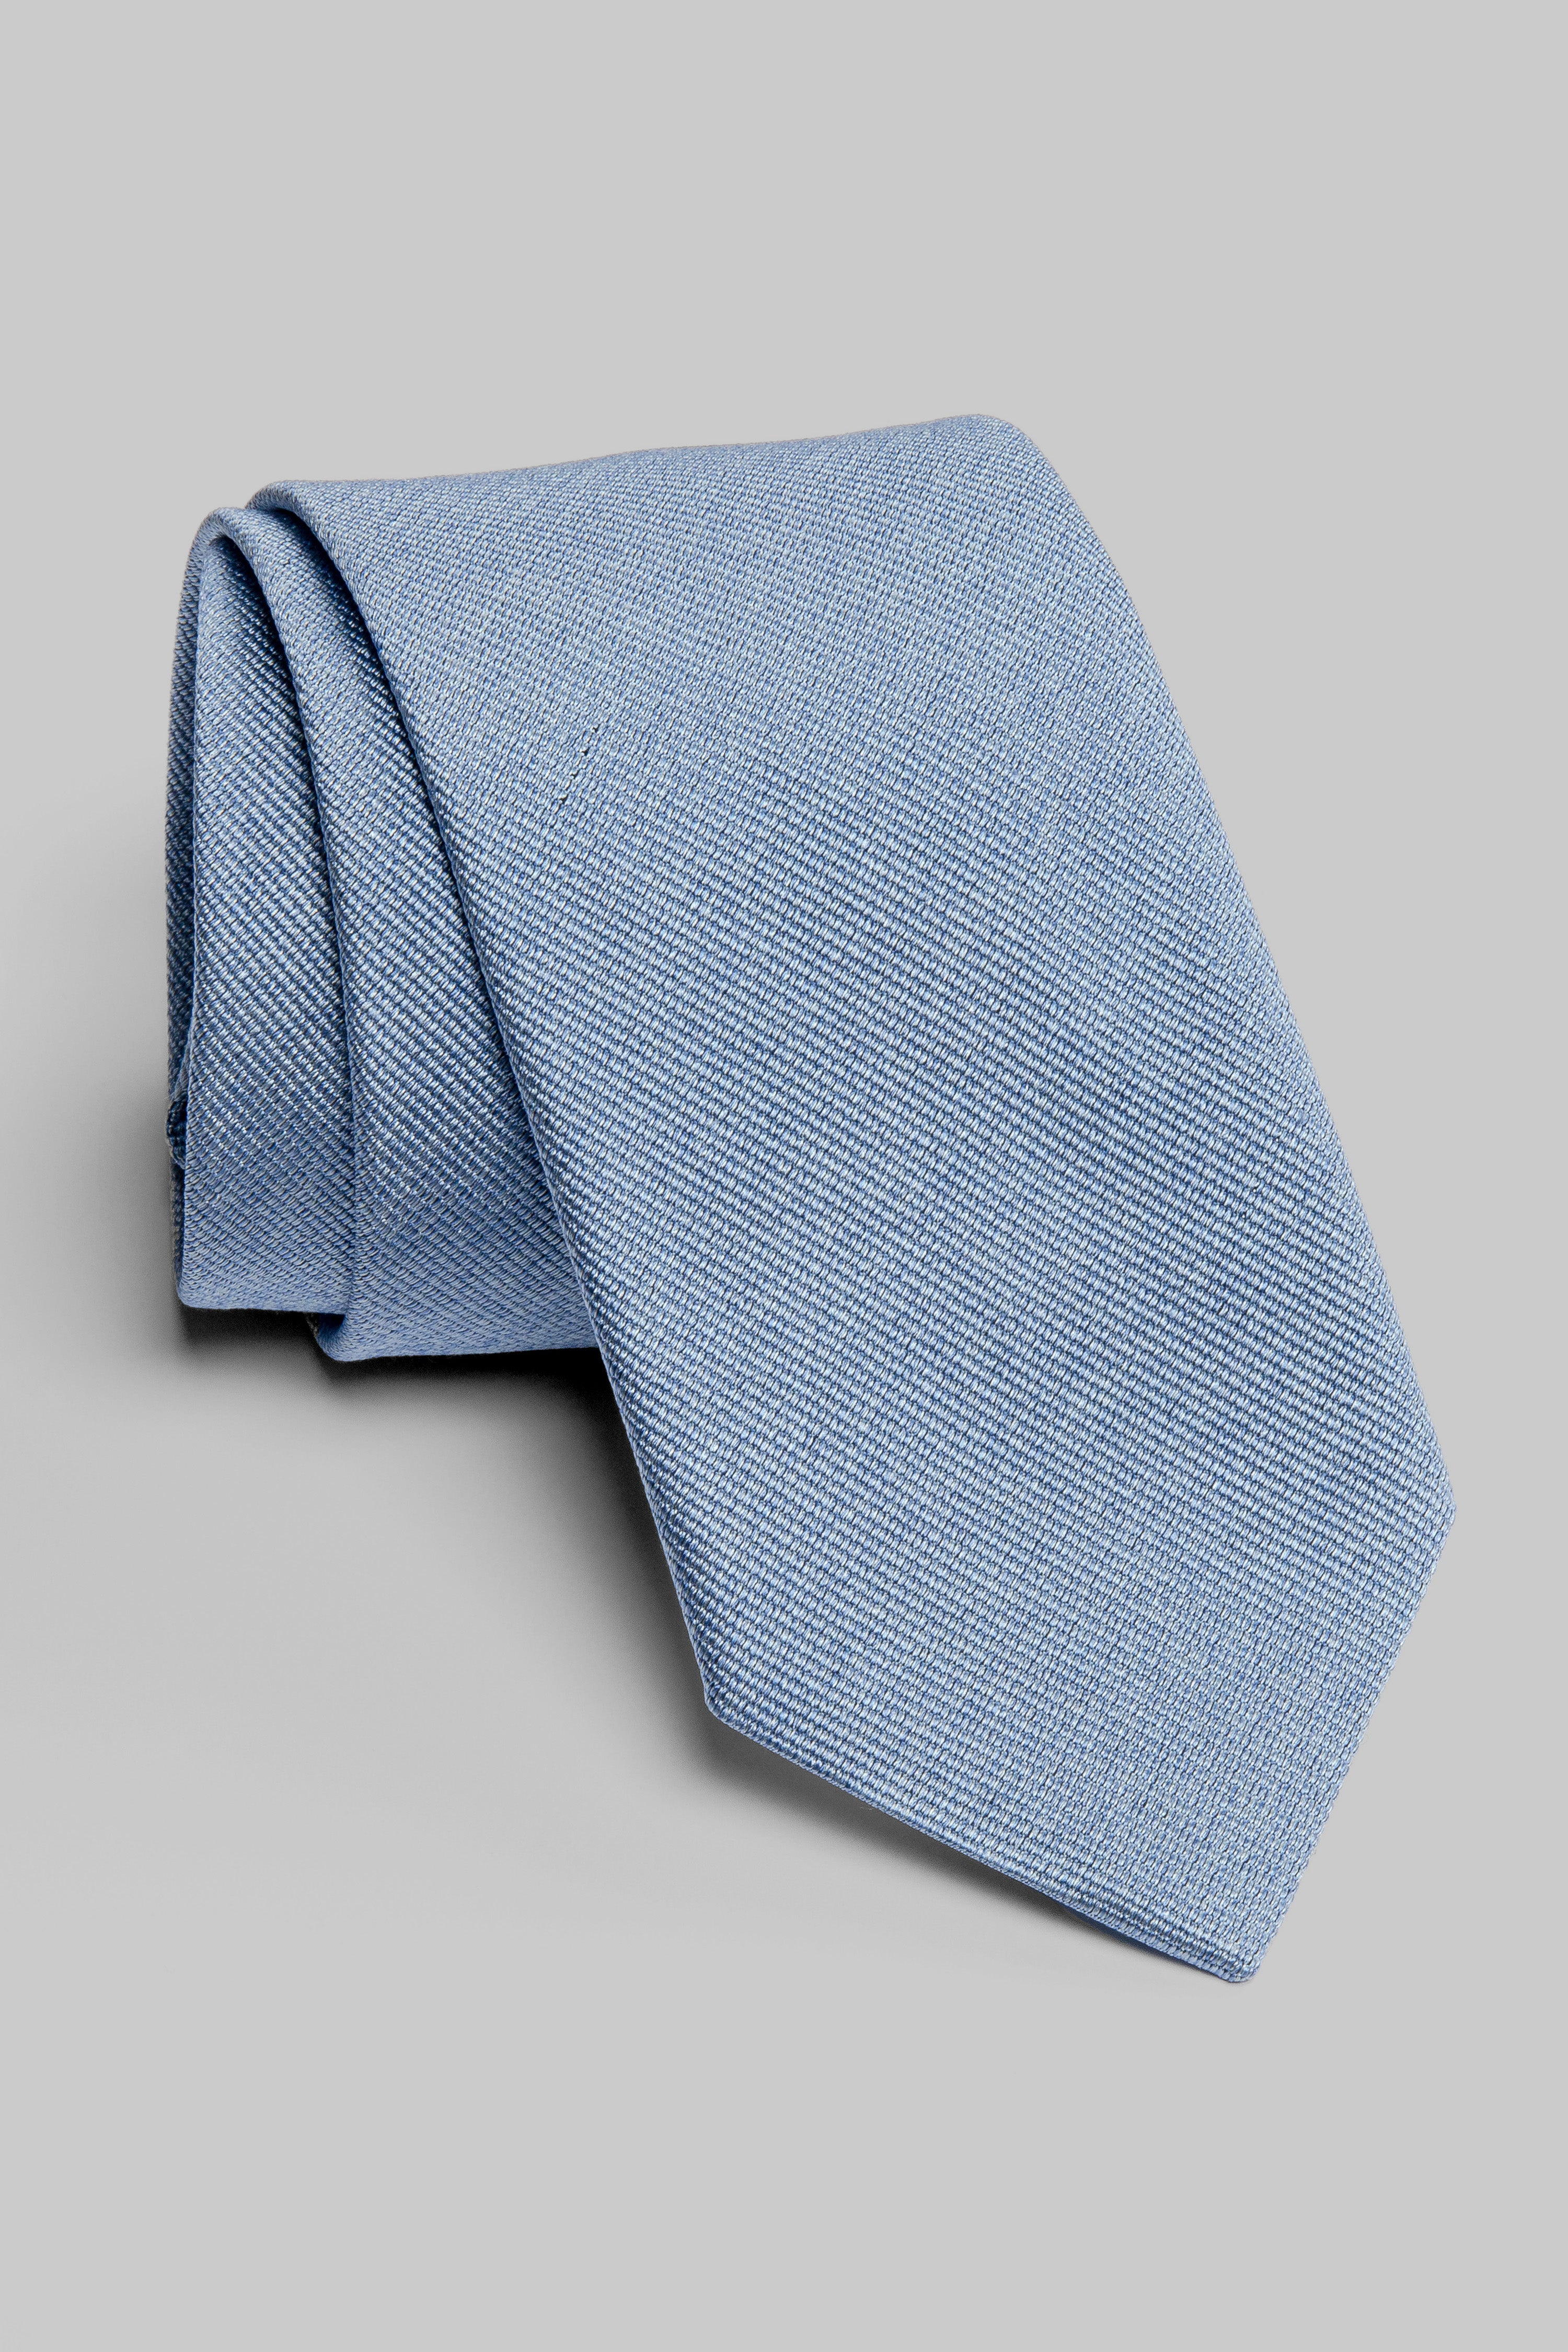 Alt view Bowman Solid Woven Tie in Blue